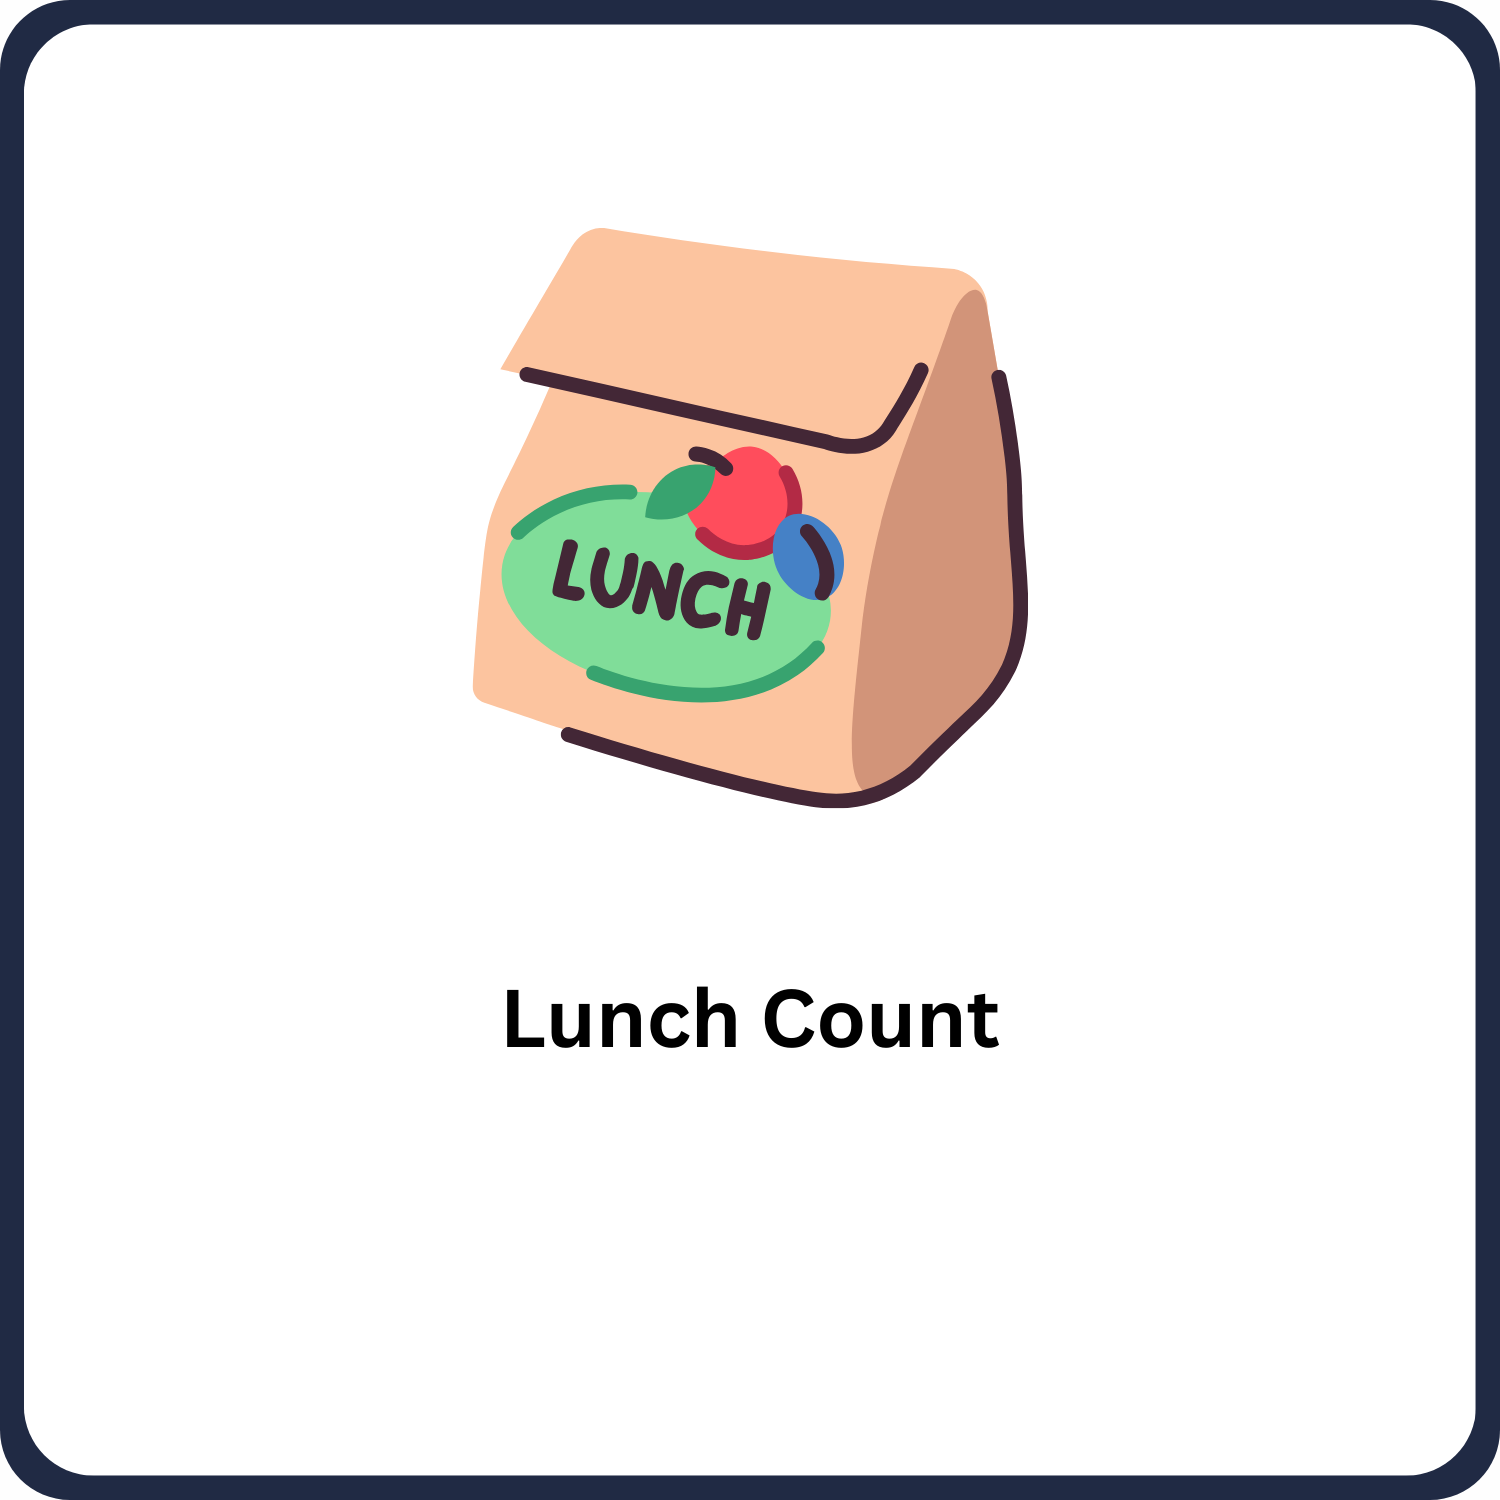 Lunch Count